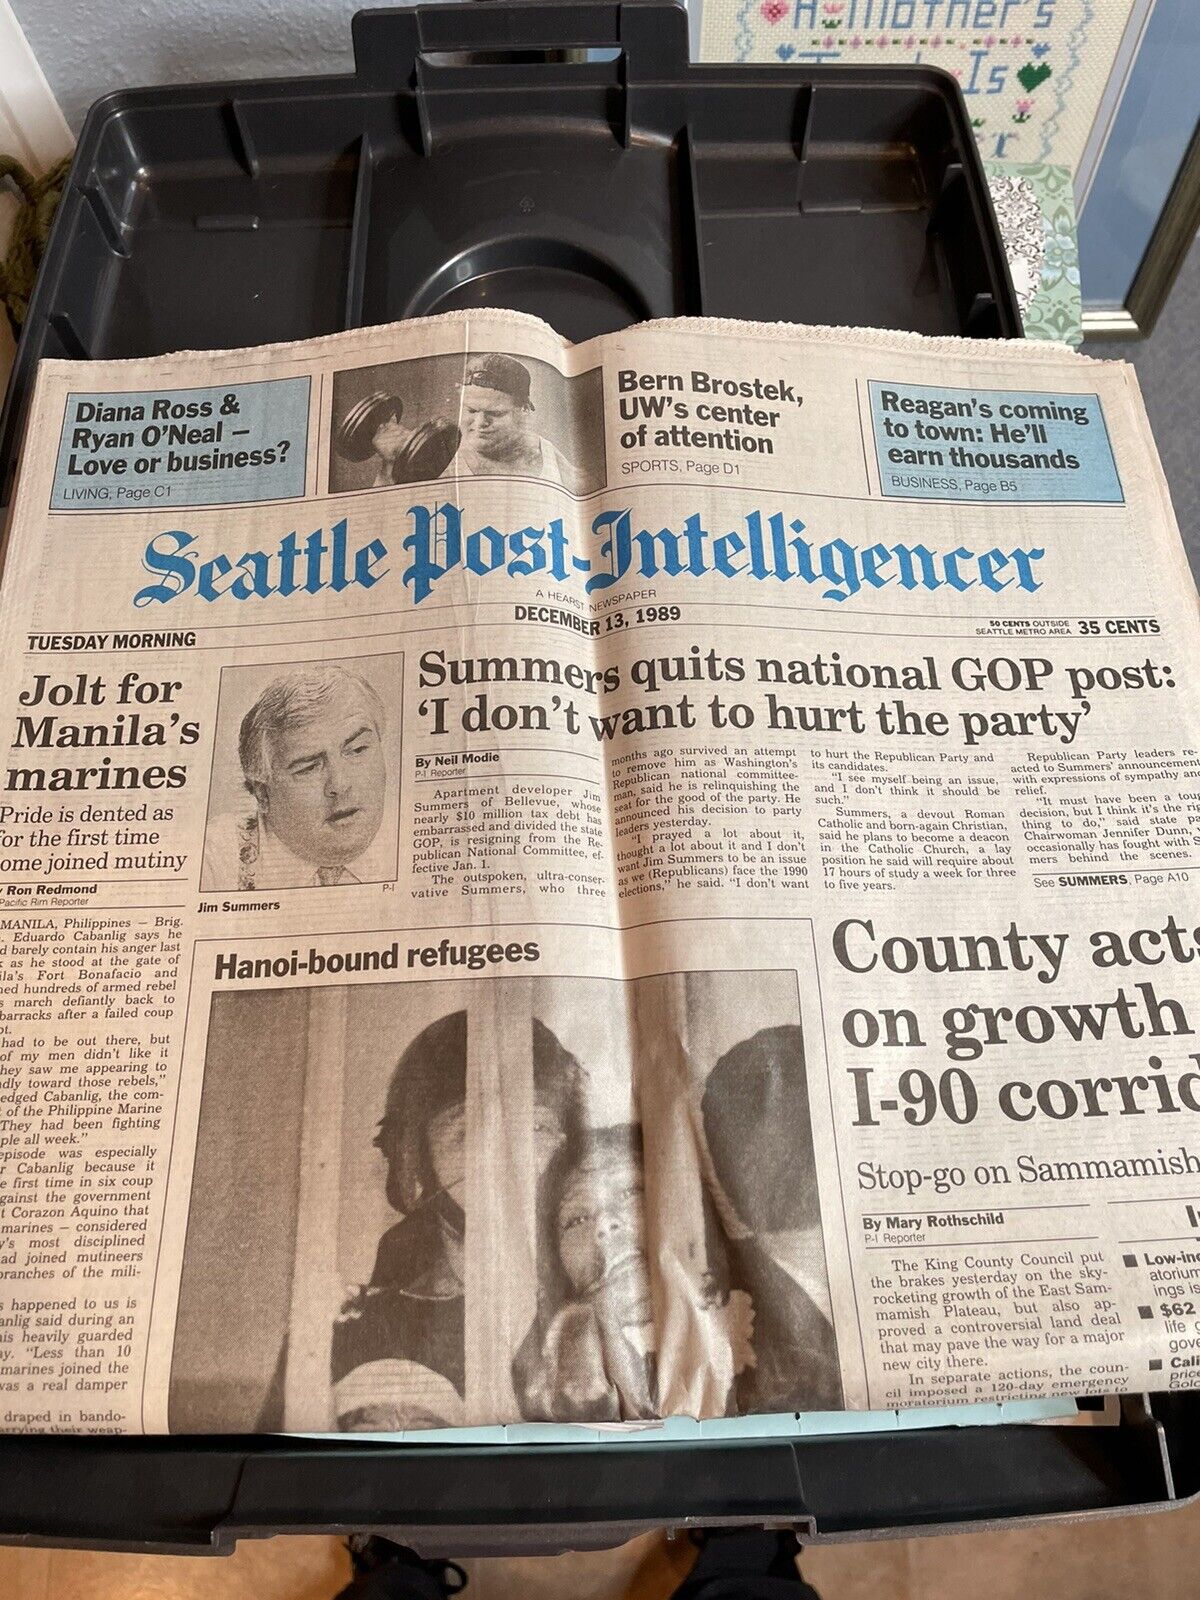 Seattle Post Intelligencer  published with the wrong Day/date Dec 13th 1989